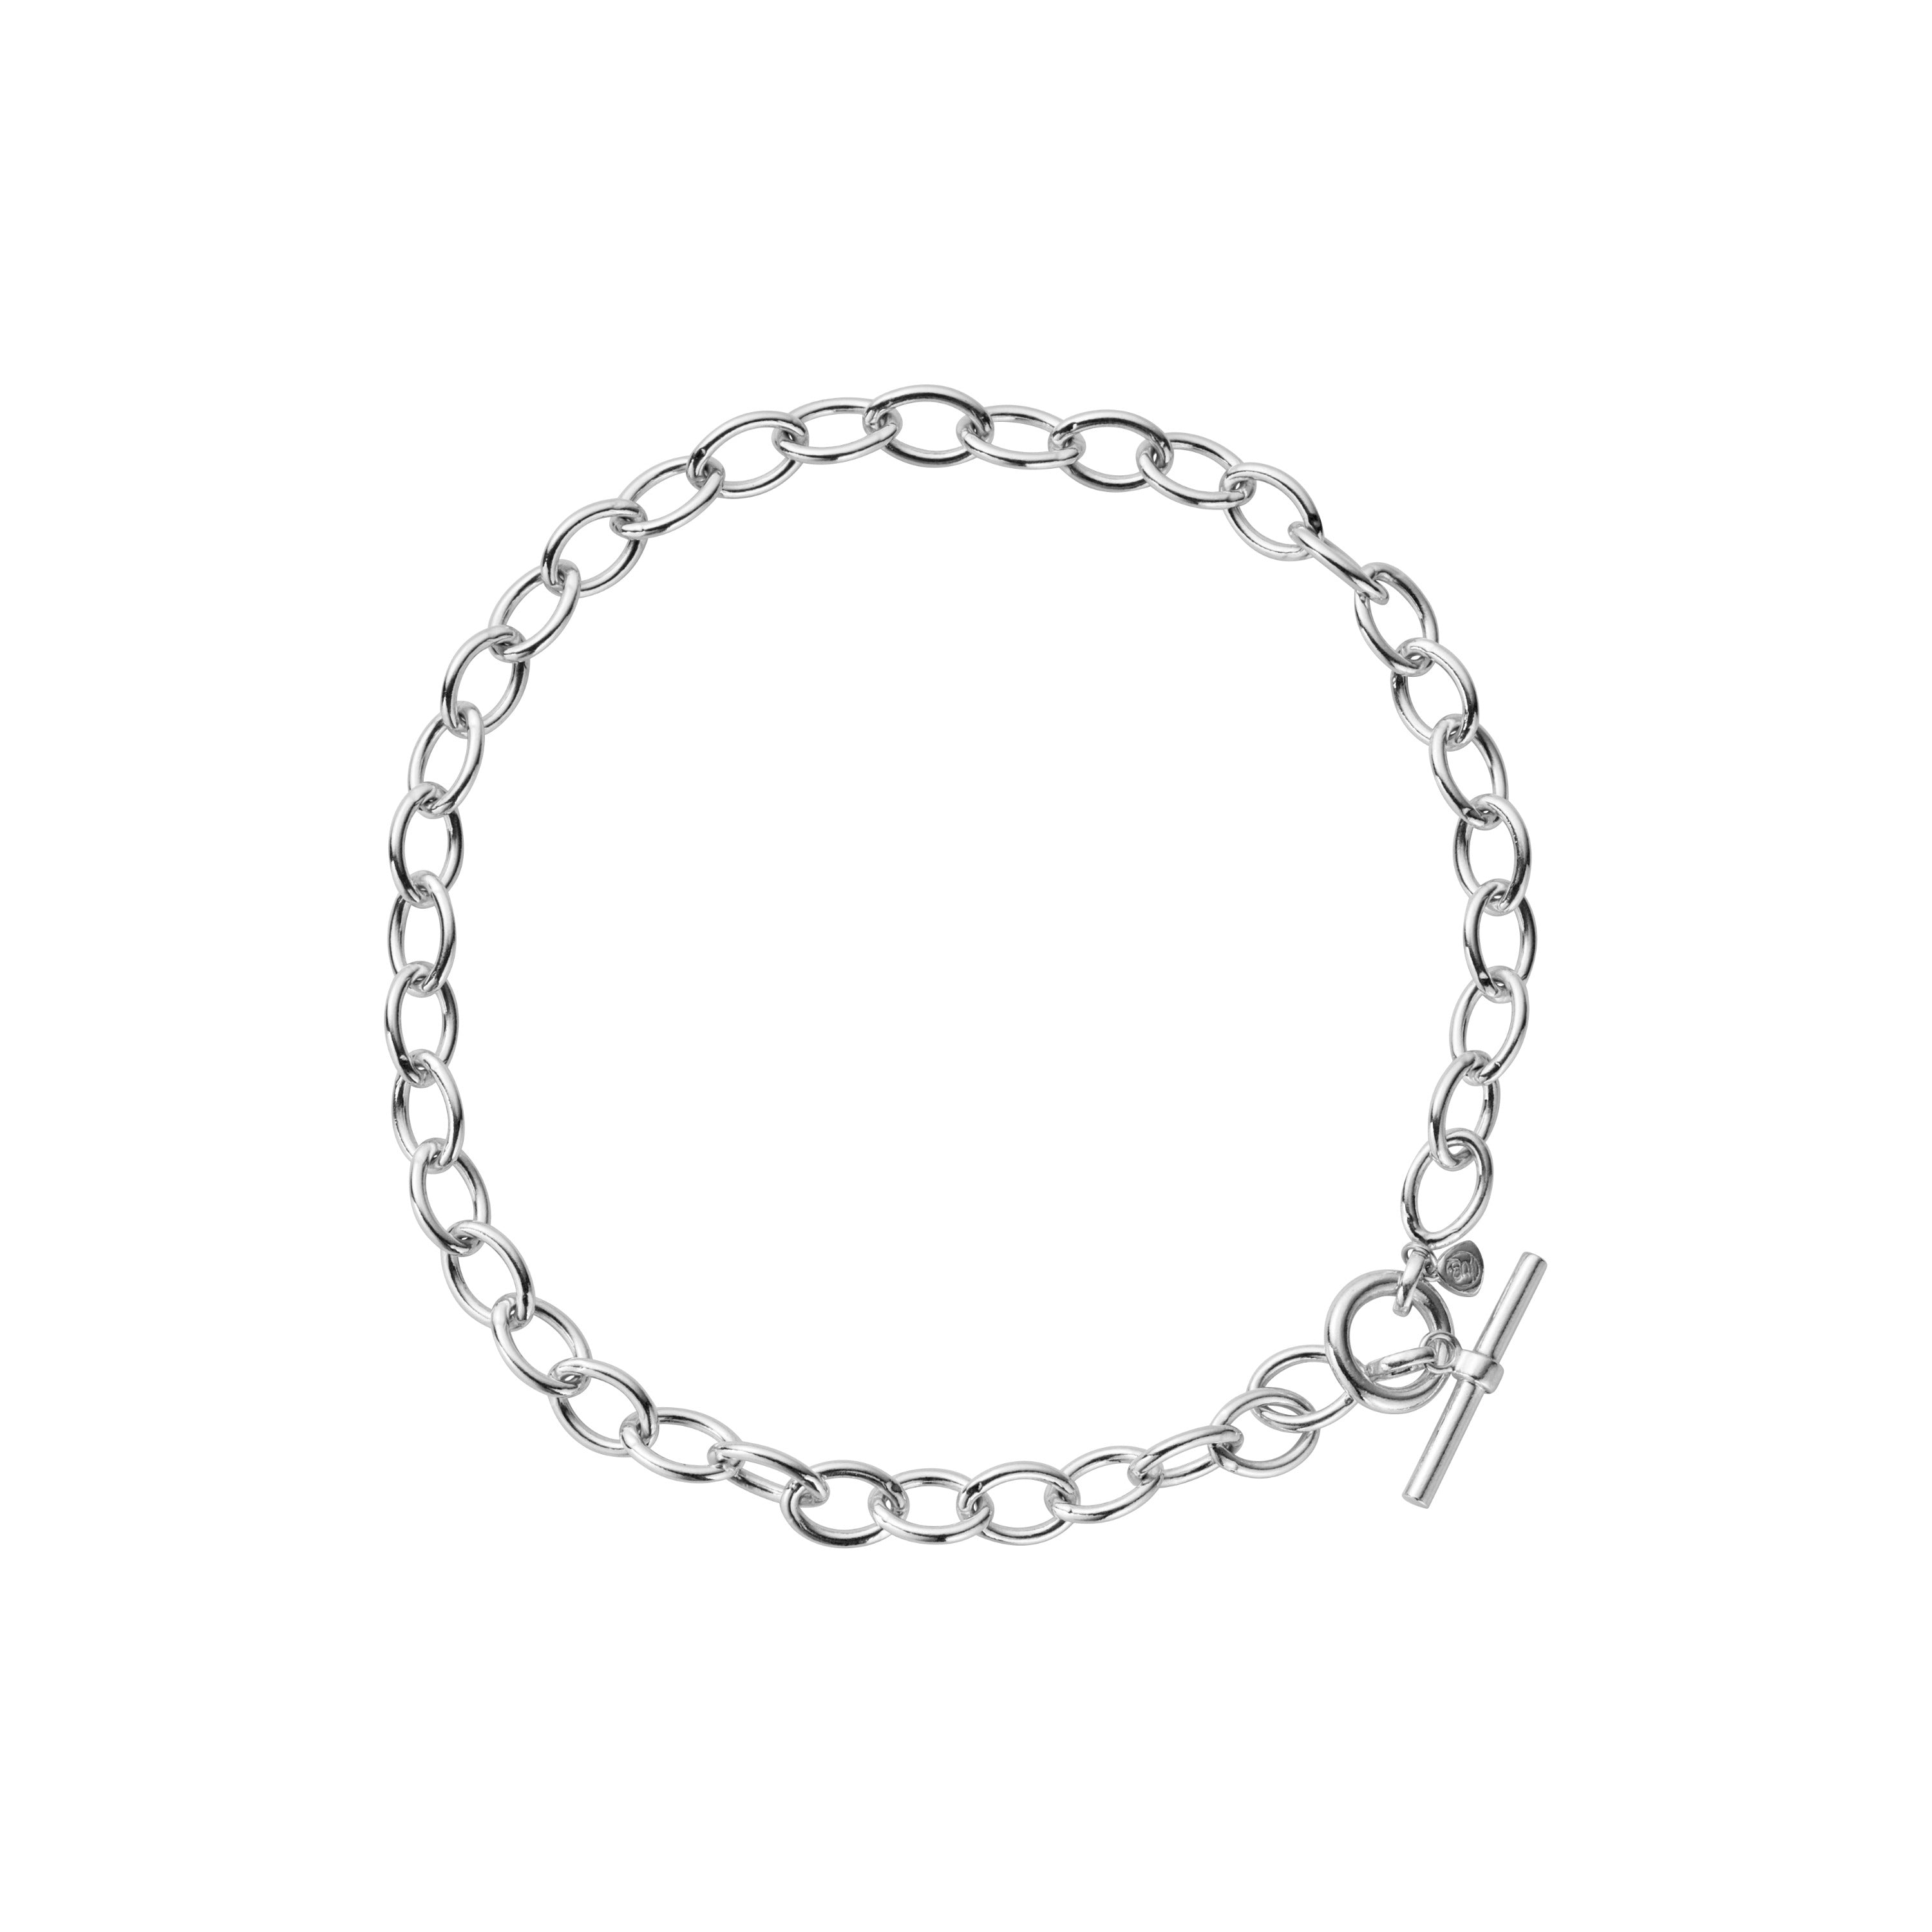 Buy The Silver Sylt Chain Necklace From British Jewellery Designer ...